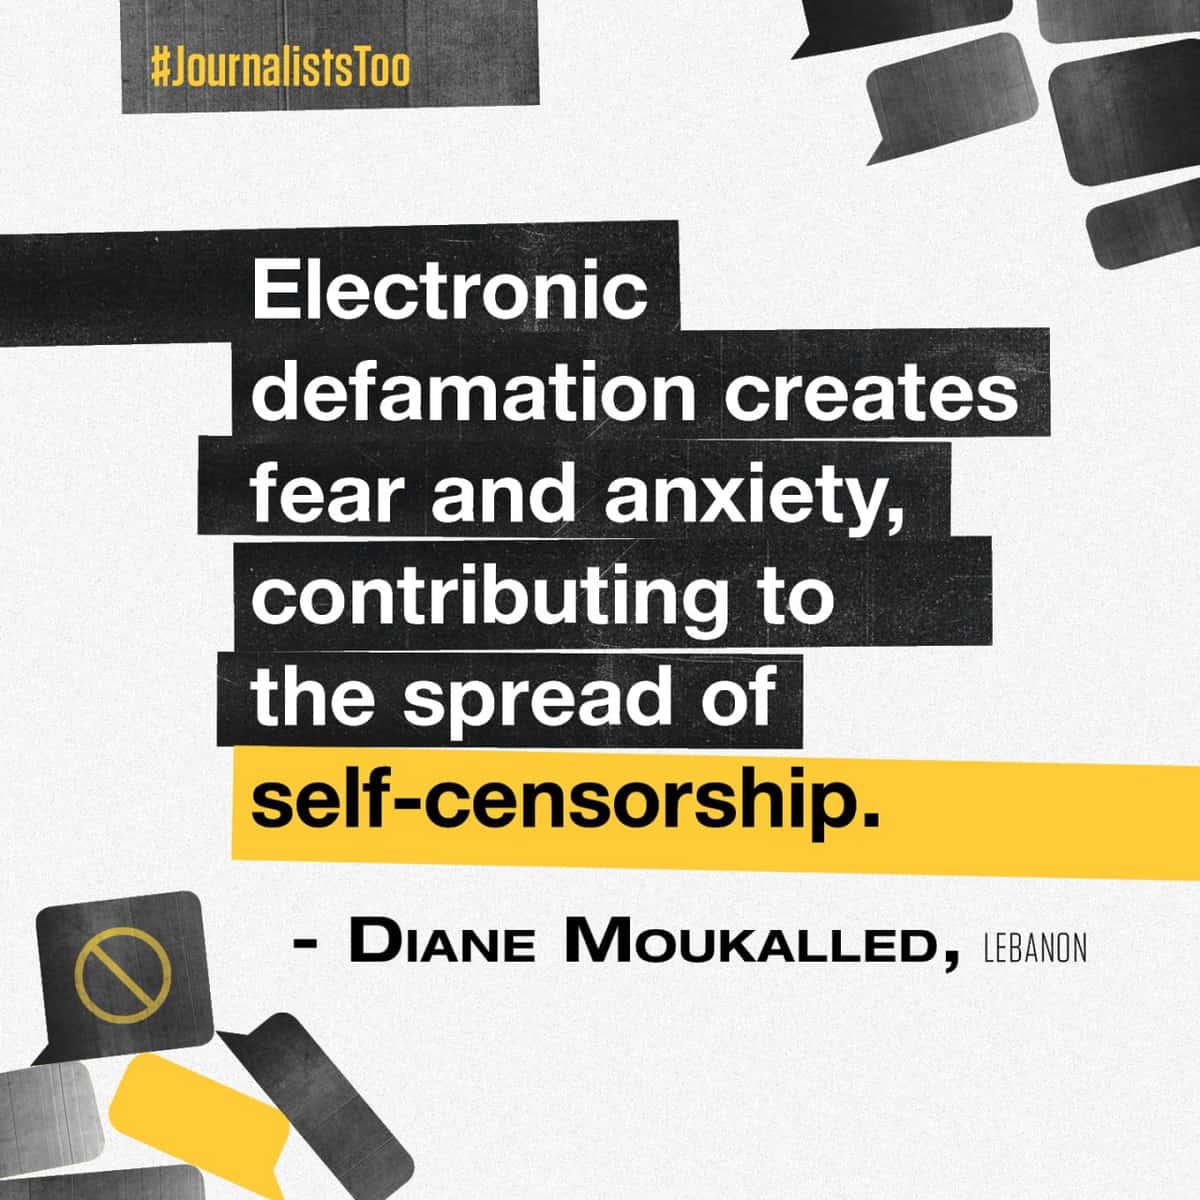 #JournalistsToo: Backing off is not an option | Diana Moukalled (Lebanon)